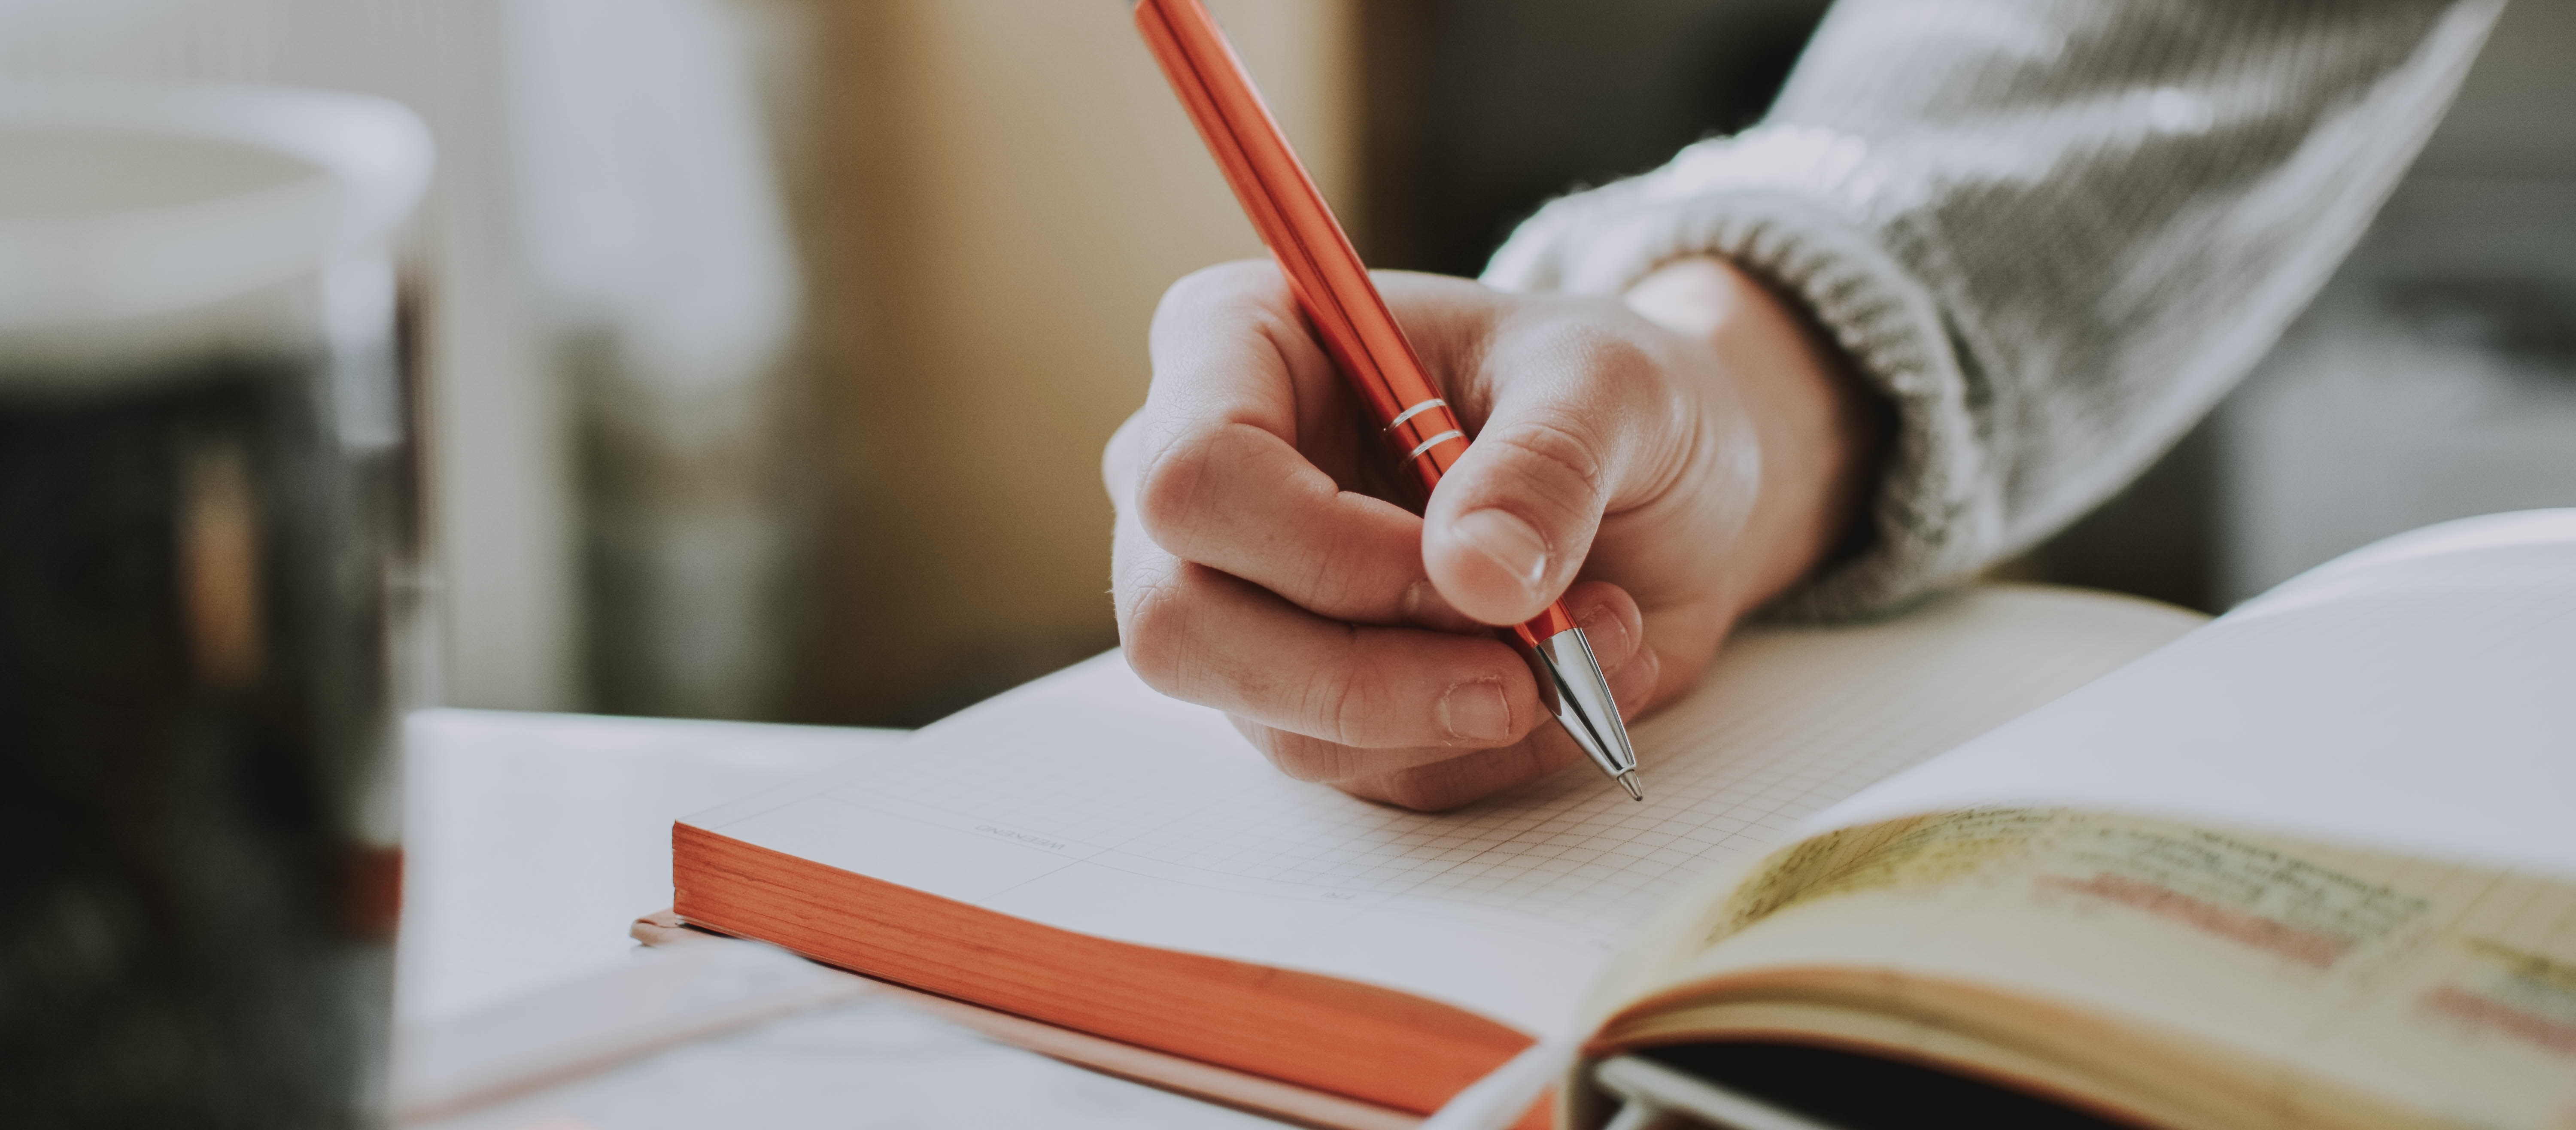 Journaling: The Coping Skill You Never Knew You Needed